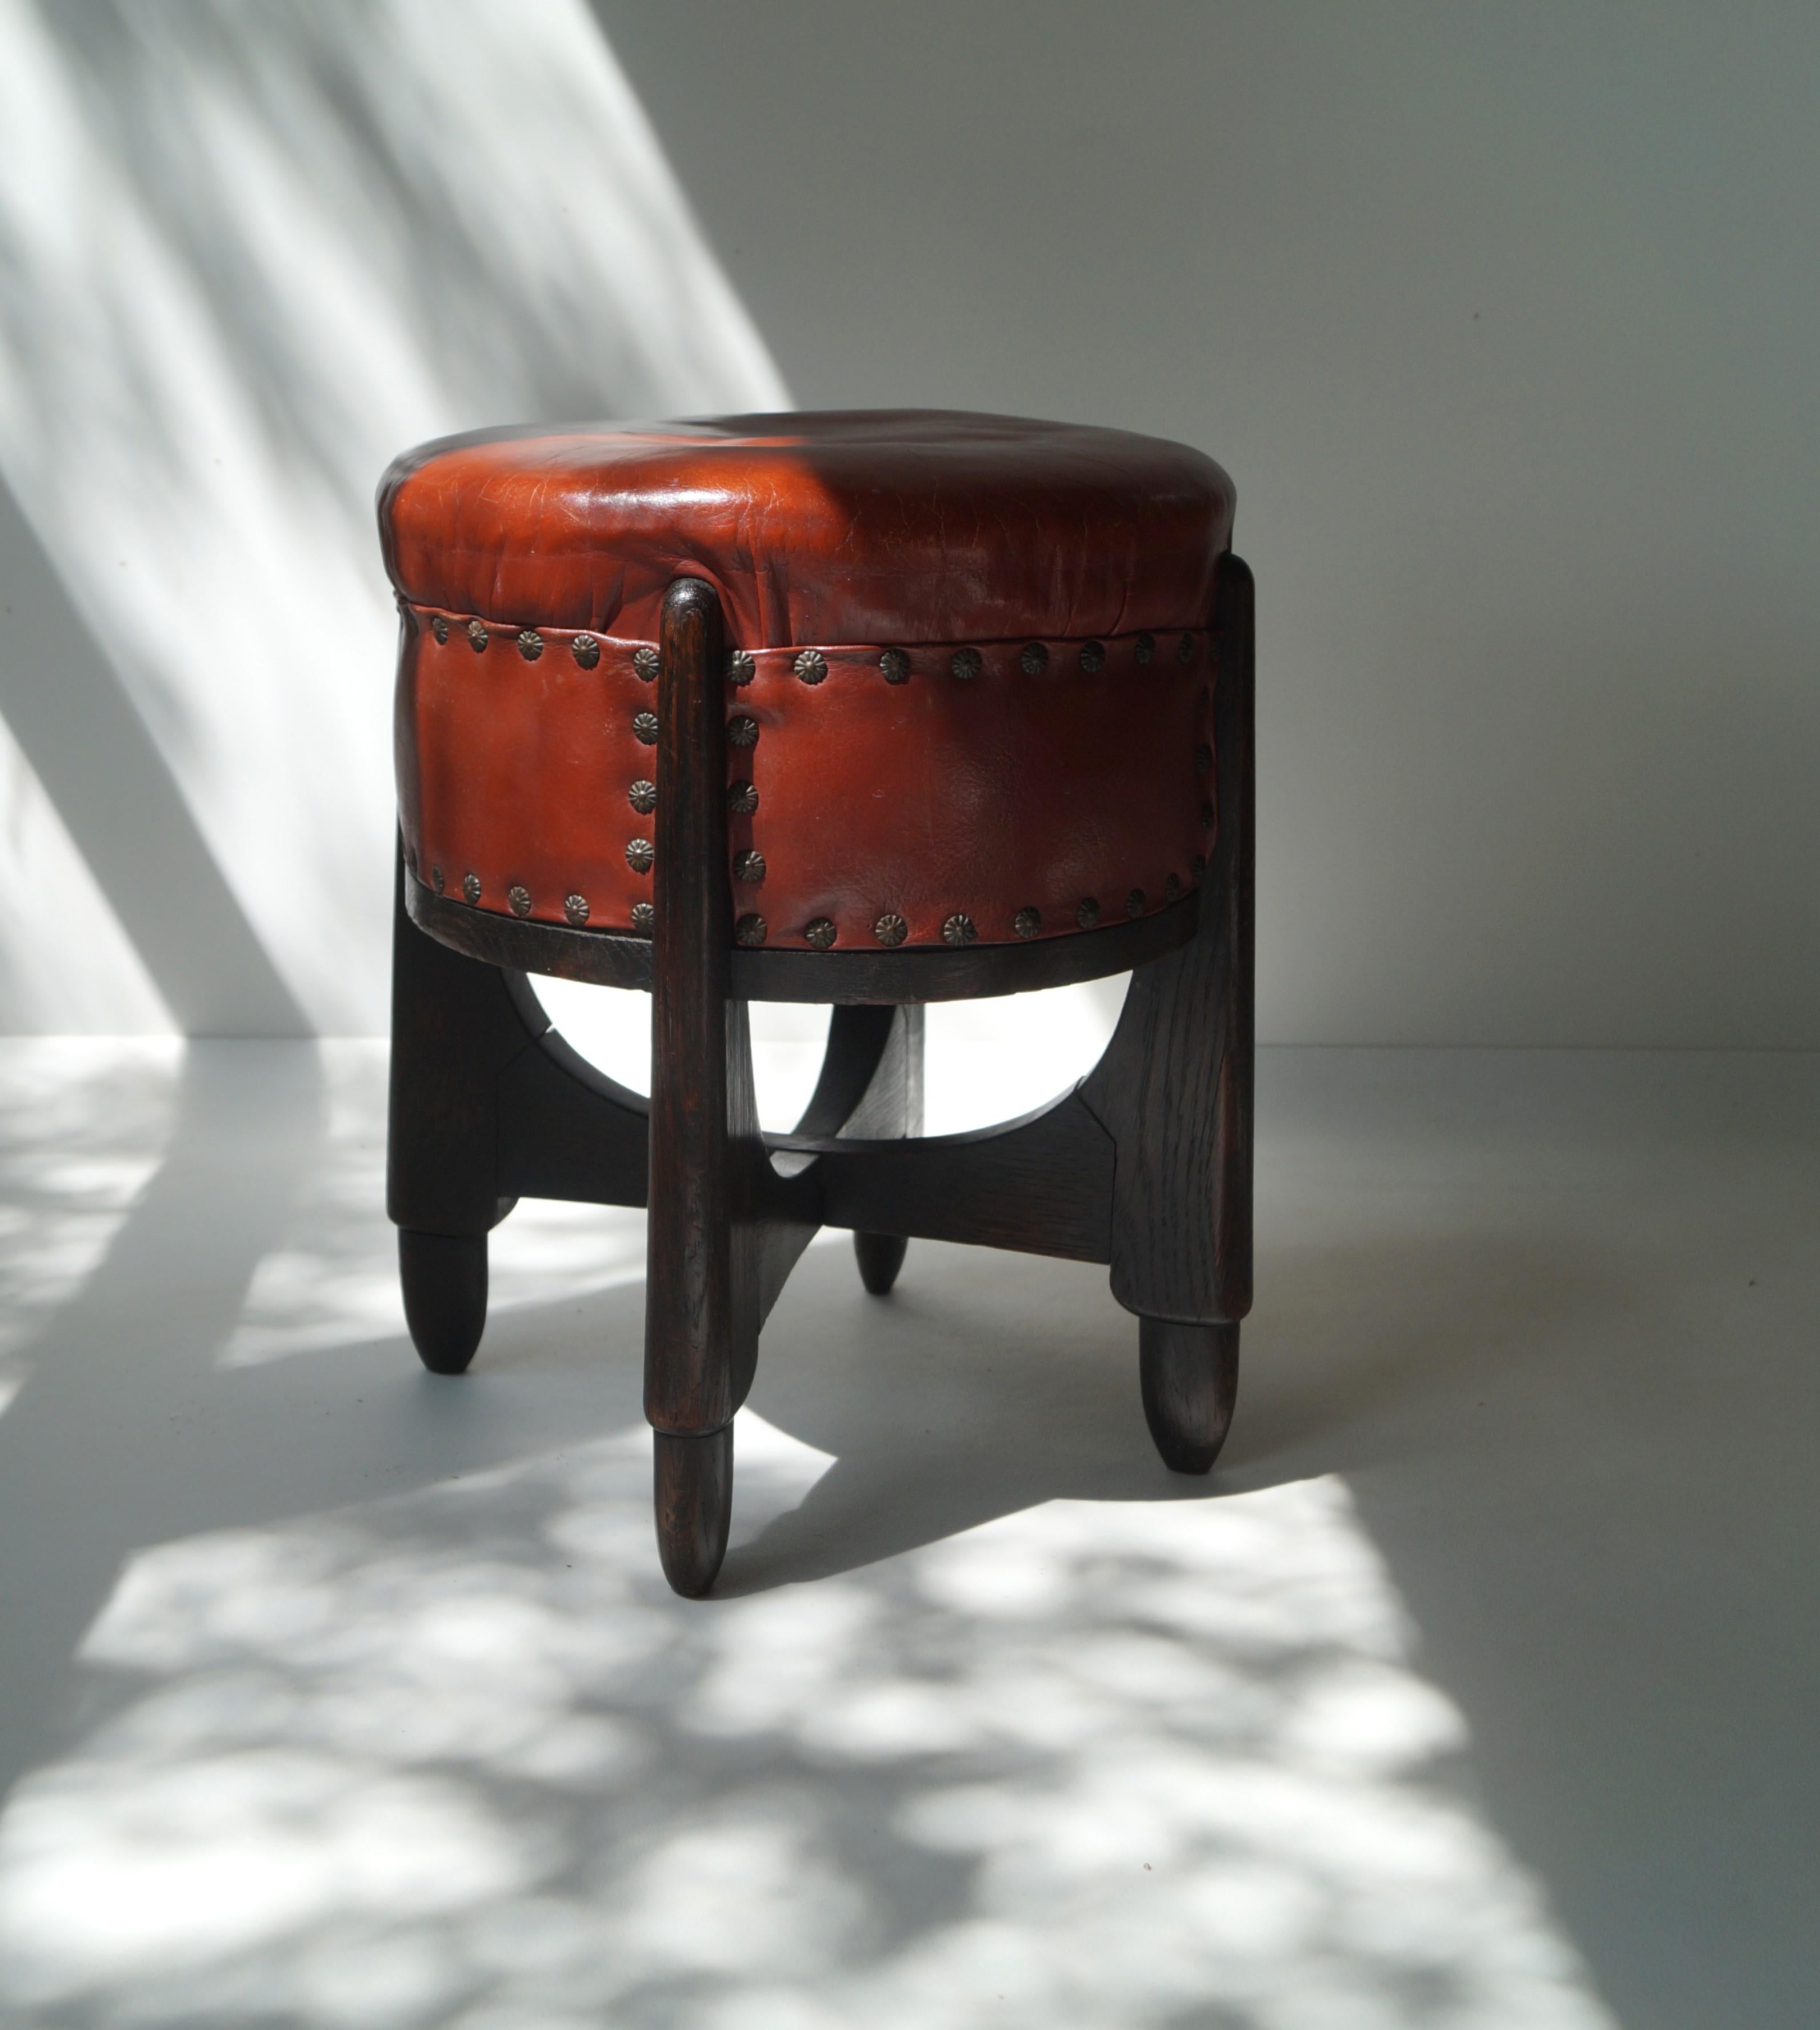 A stylish Amsterdam School stool in solid oak with vintage leather upholstery. These stools were manufactured in the early 1920s for the luxury wallpaper and paint shops Rath & Doodeheefver (see images). Famous Amsterdam School architect Piet Kramer